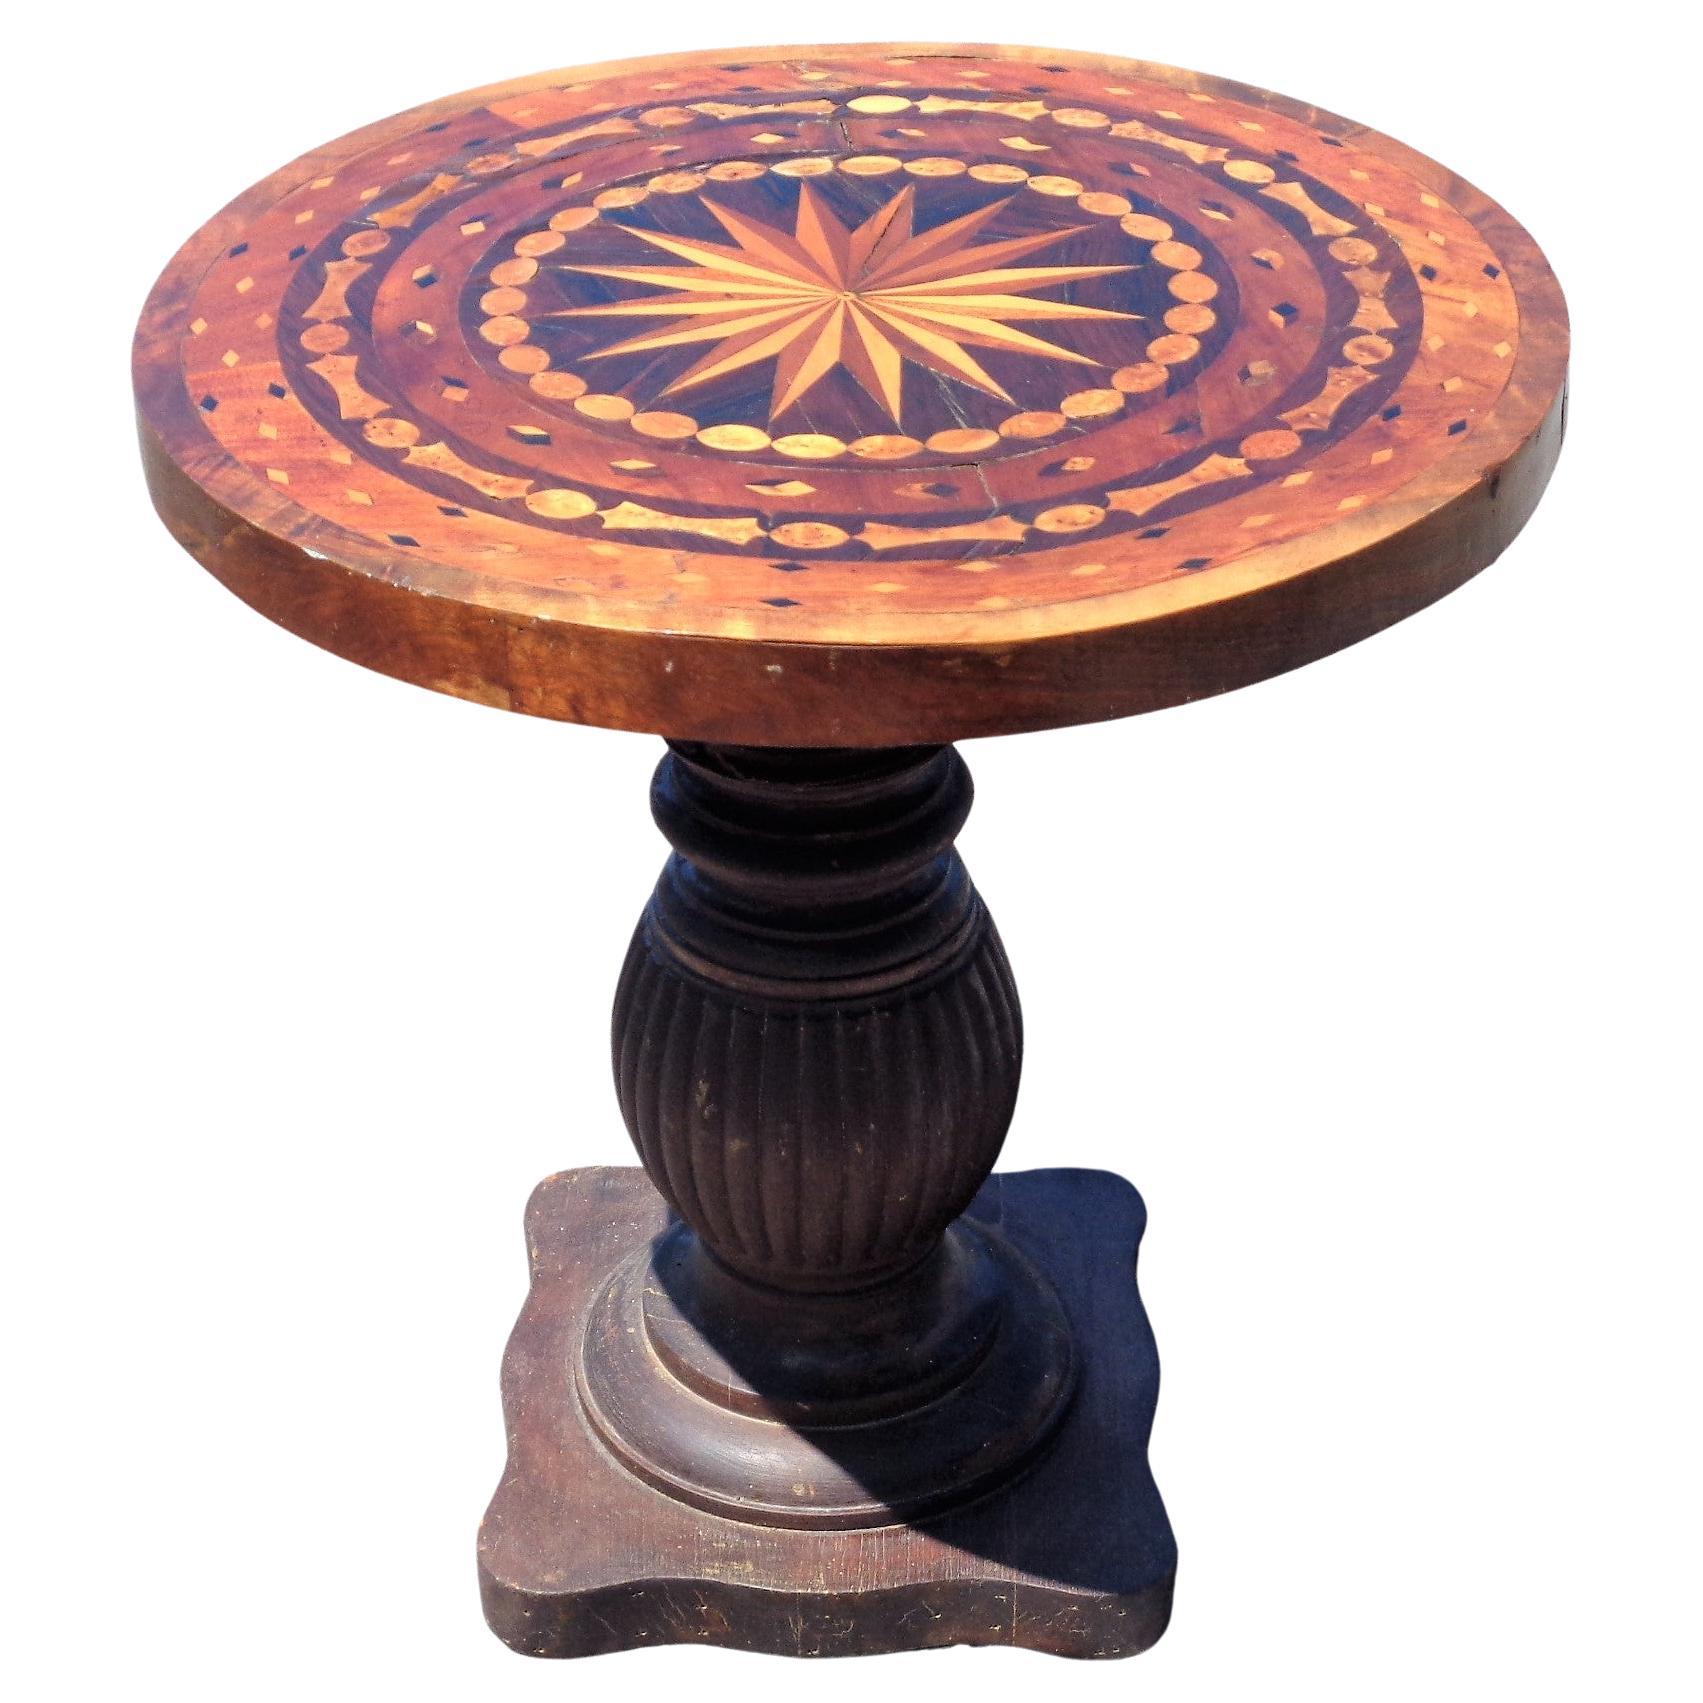 Wood Antique Parquetry Inlaid Compass Design Top Table w/ Fluted Pedestal Base For Sale